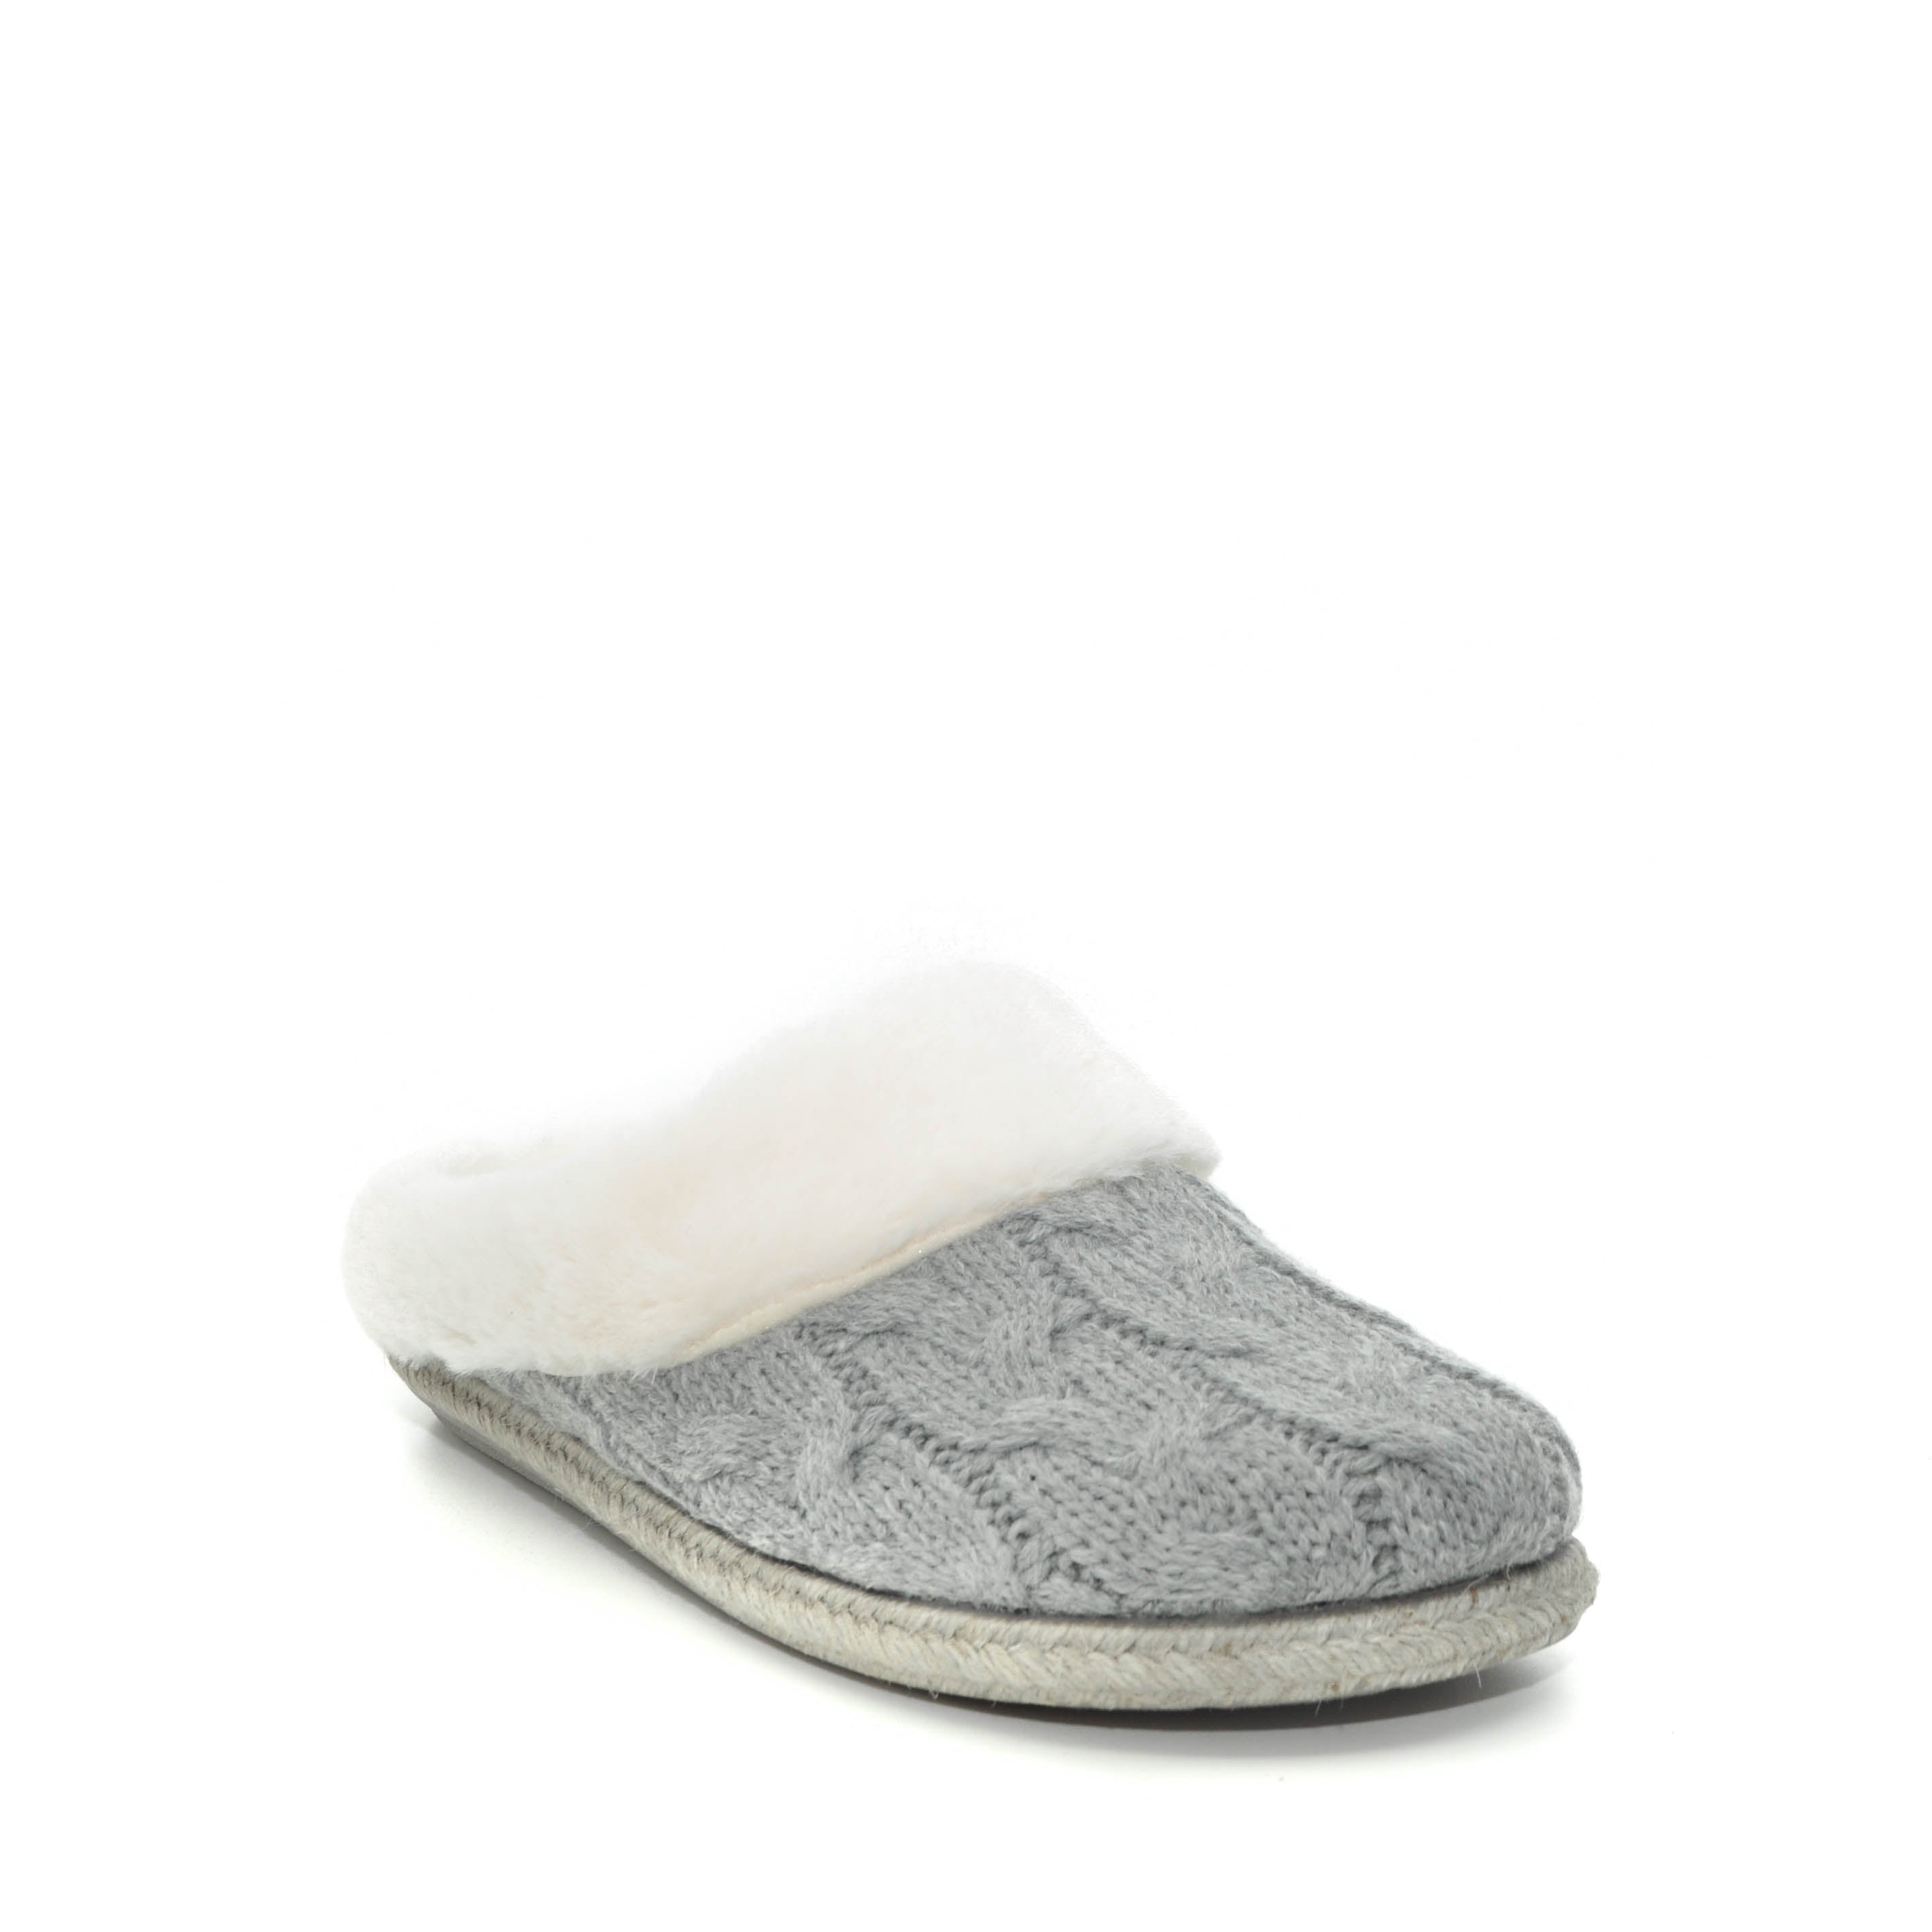 toni pon best slippers for women